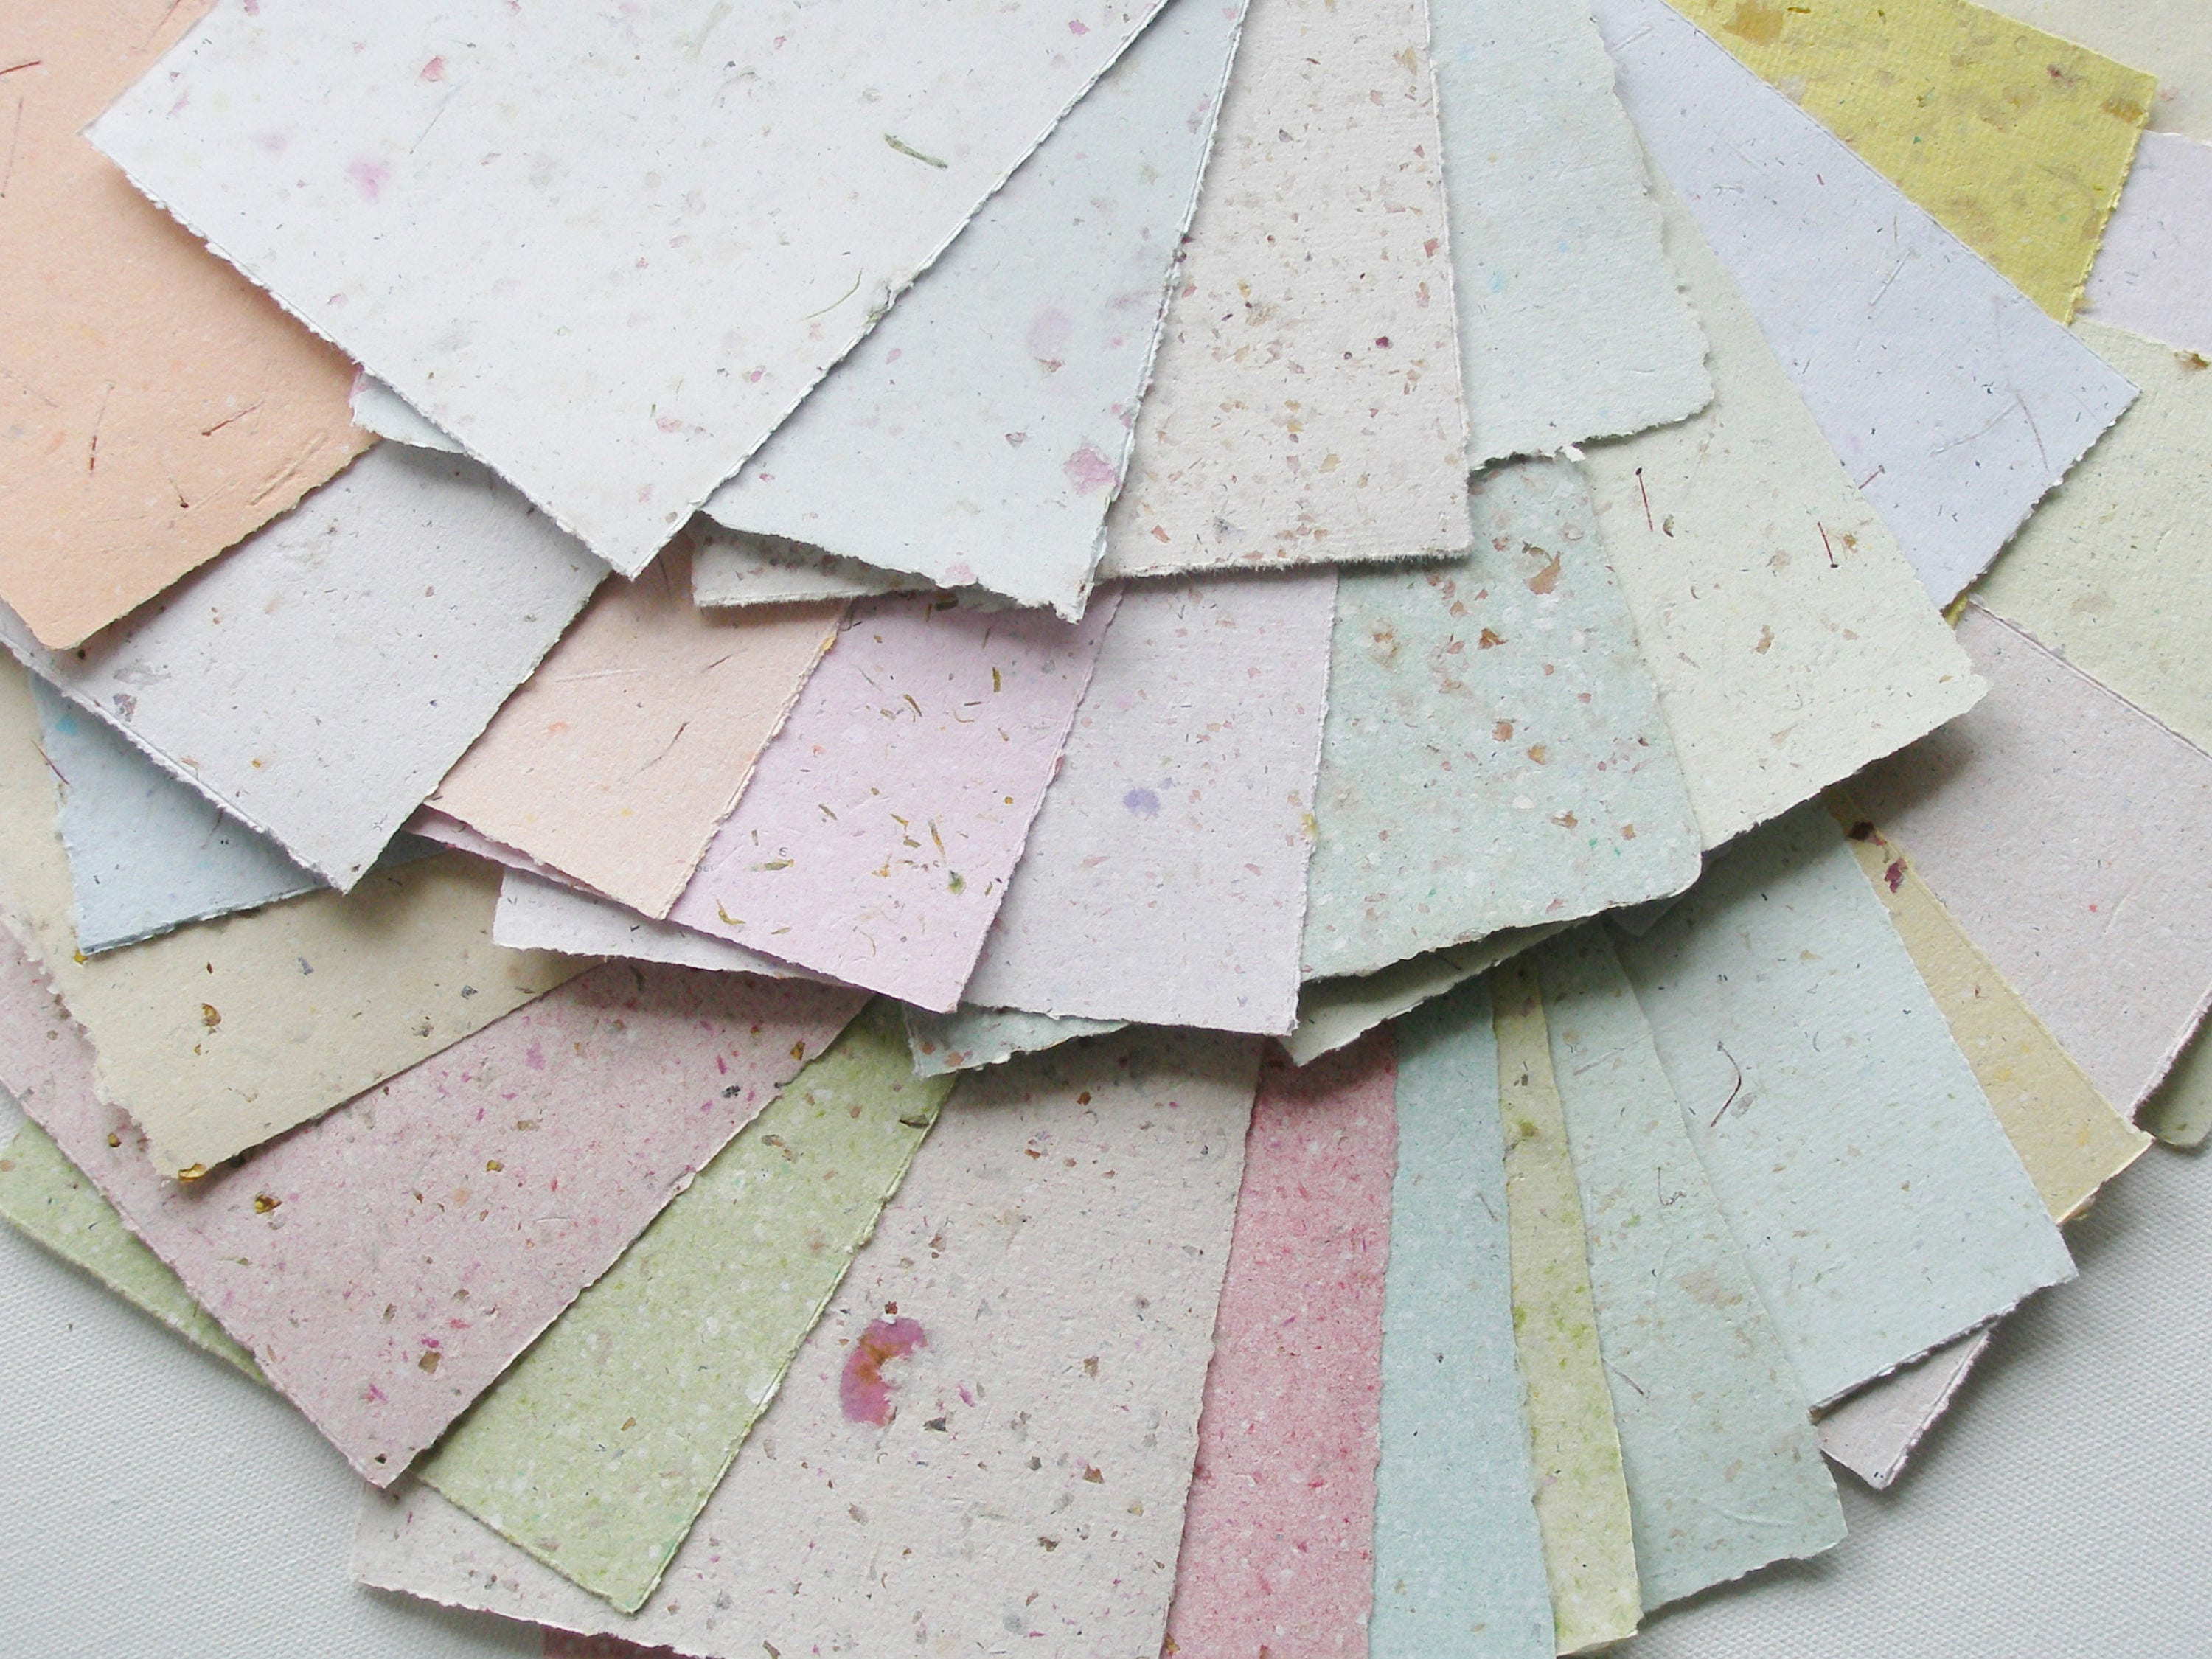 100 Sheets 4 X 6 Inch. Mixed Colour Handmade Recycled Paper, Many Sheets  With Botanicals and Flower Petals -  Hong Kong